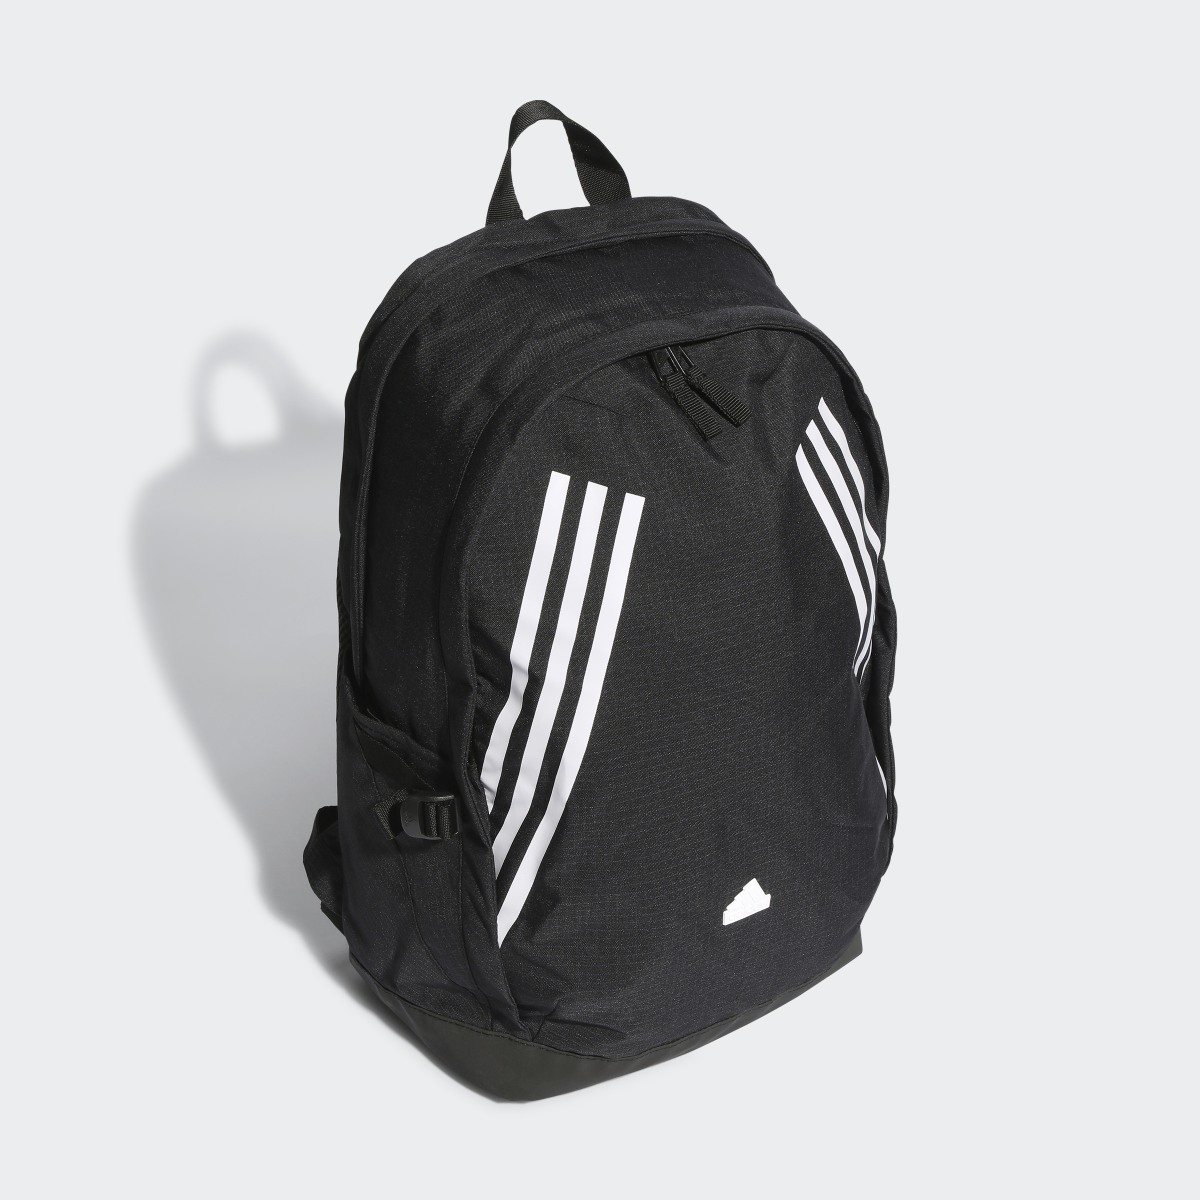 Adidas Back to School Backpack. 4